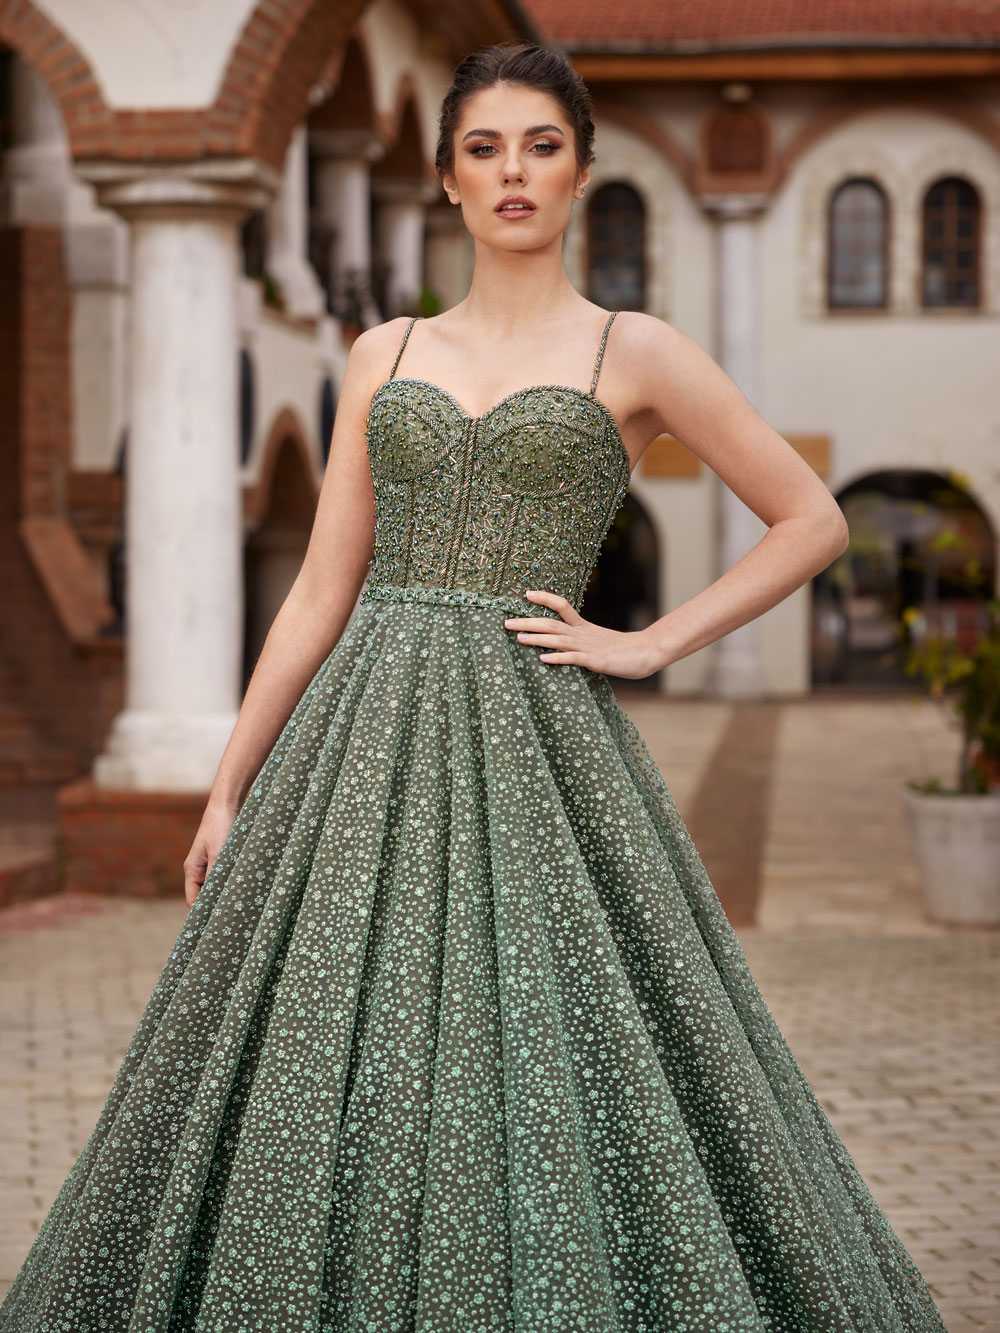 buy Elegant Light Green Beaded Lace Bodice Floor Length A-line Long Tail Wedding Prom Formal Evening Dress with corset bodice and spaghetti sleeves online prom gowns shop